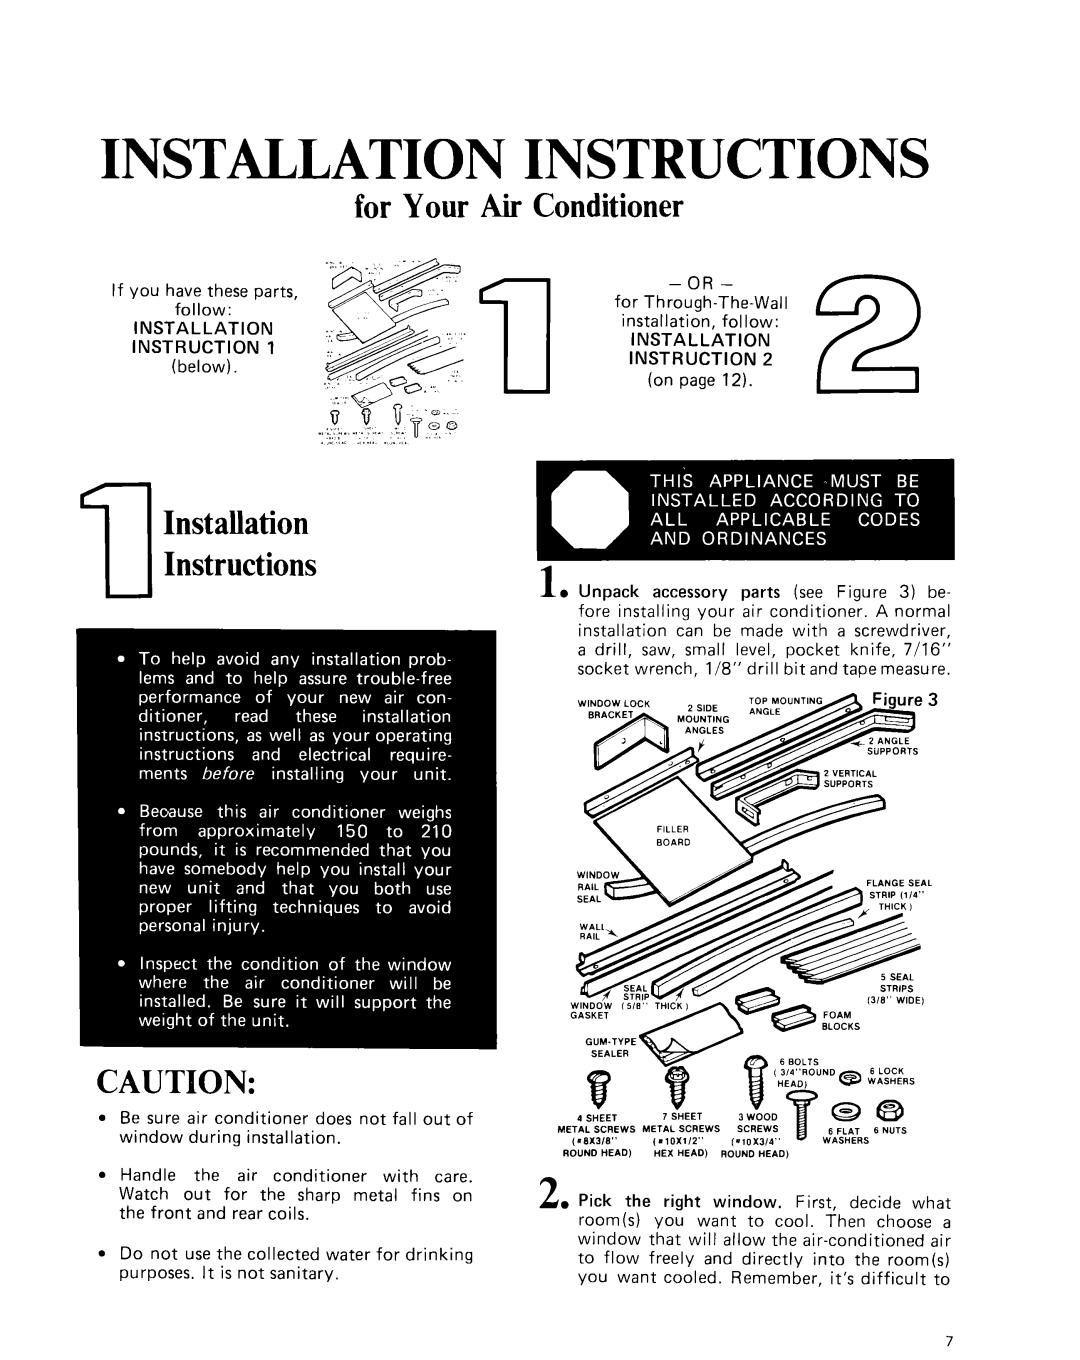 Whirlpool CAW21D2A1 manual for Your Air Conditioner, u Installation Instructions 